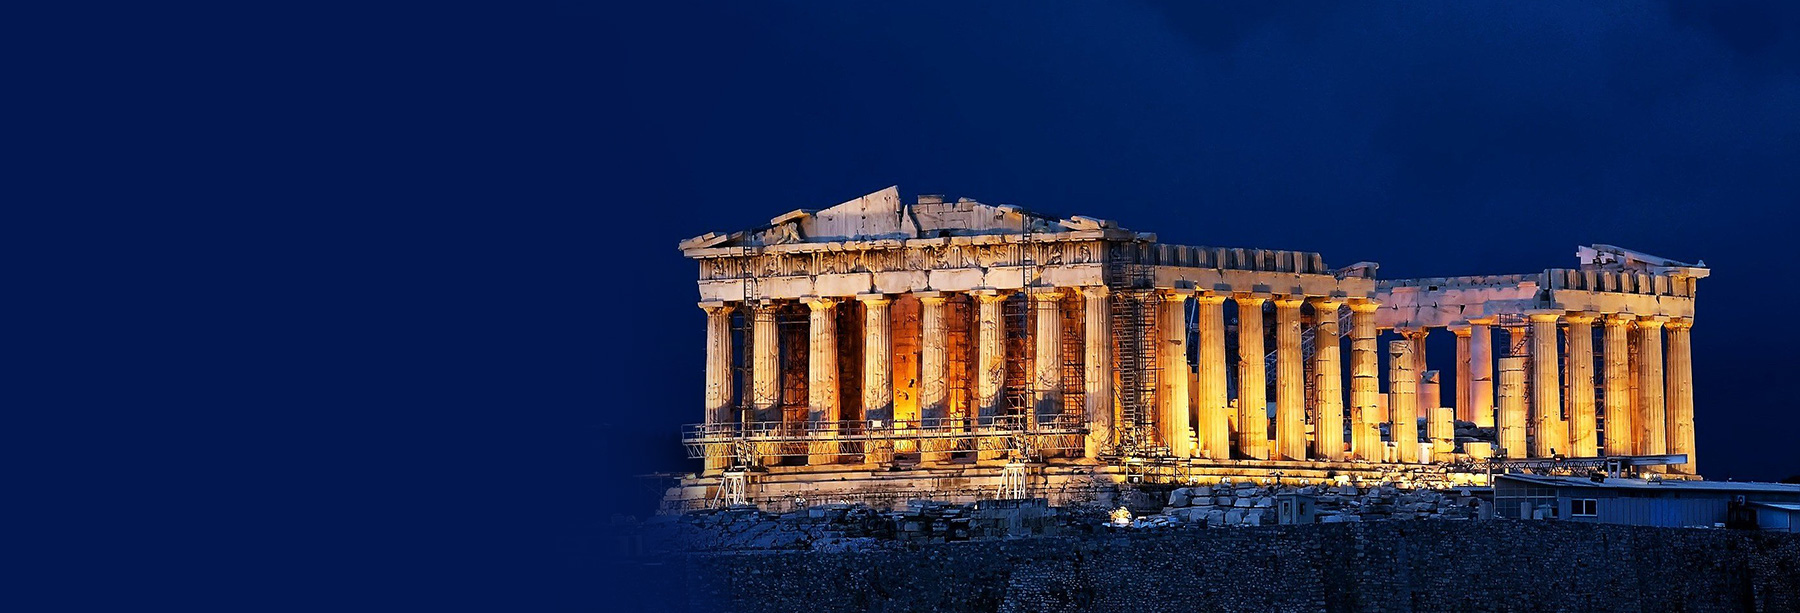 Travel and culture: All you want is Greece